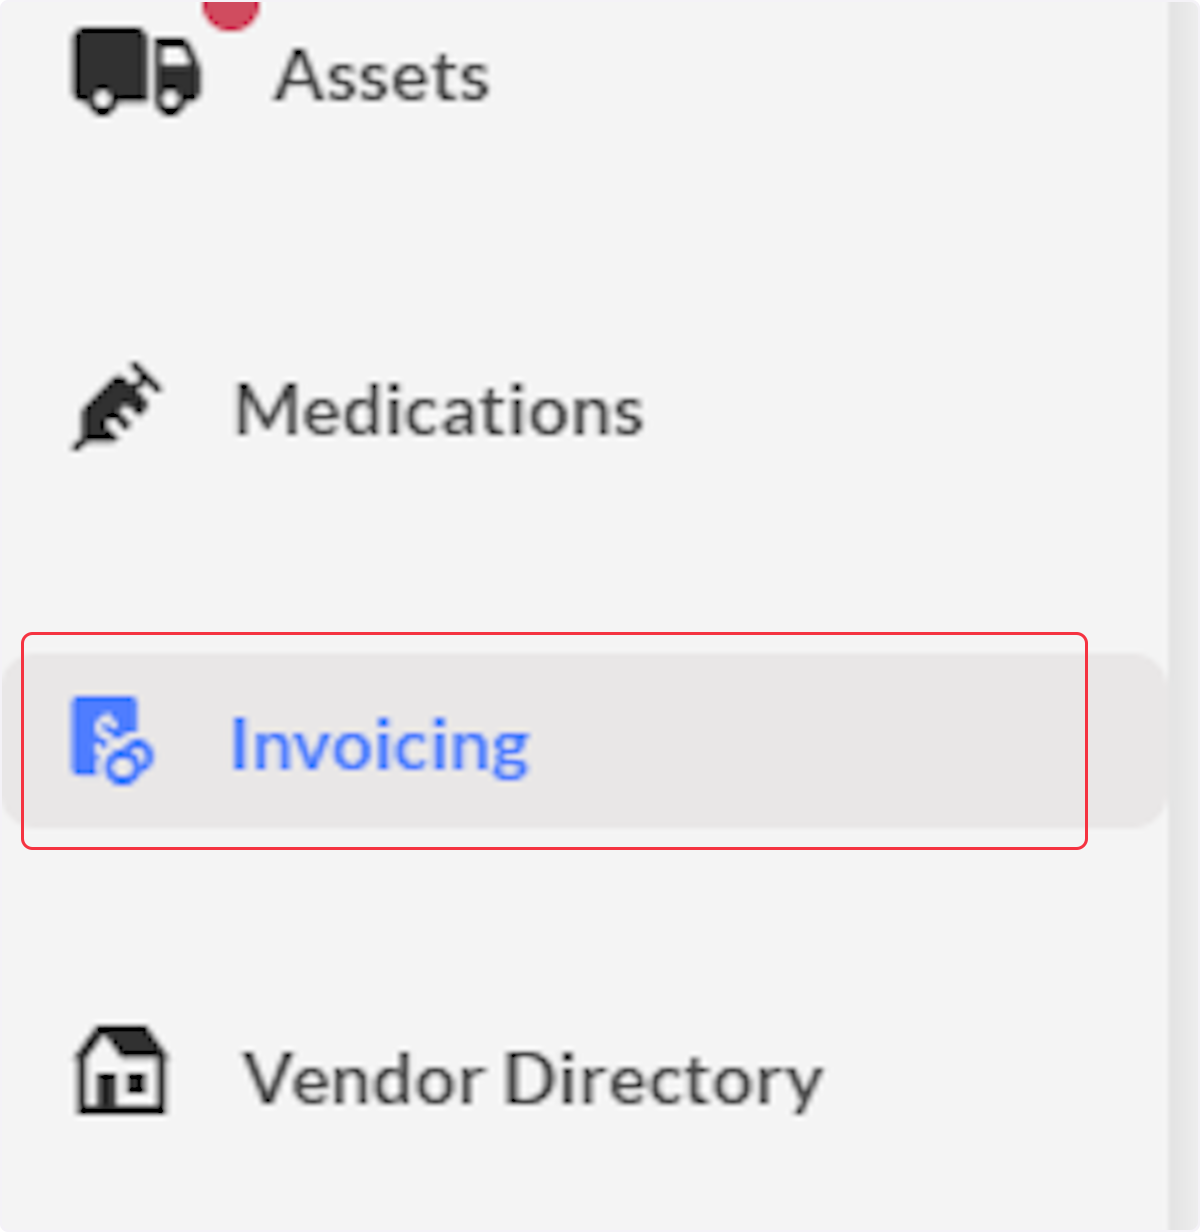 Click on Invoicing.